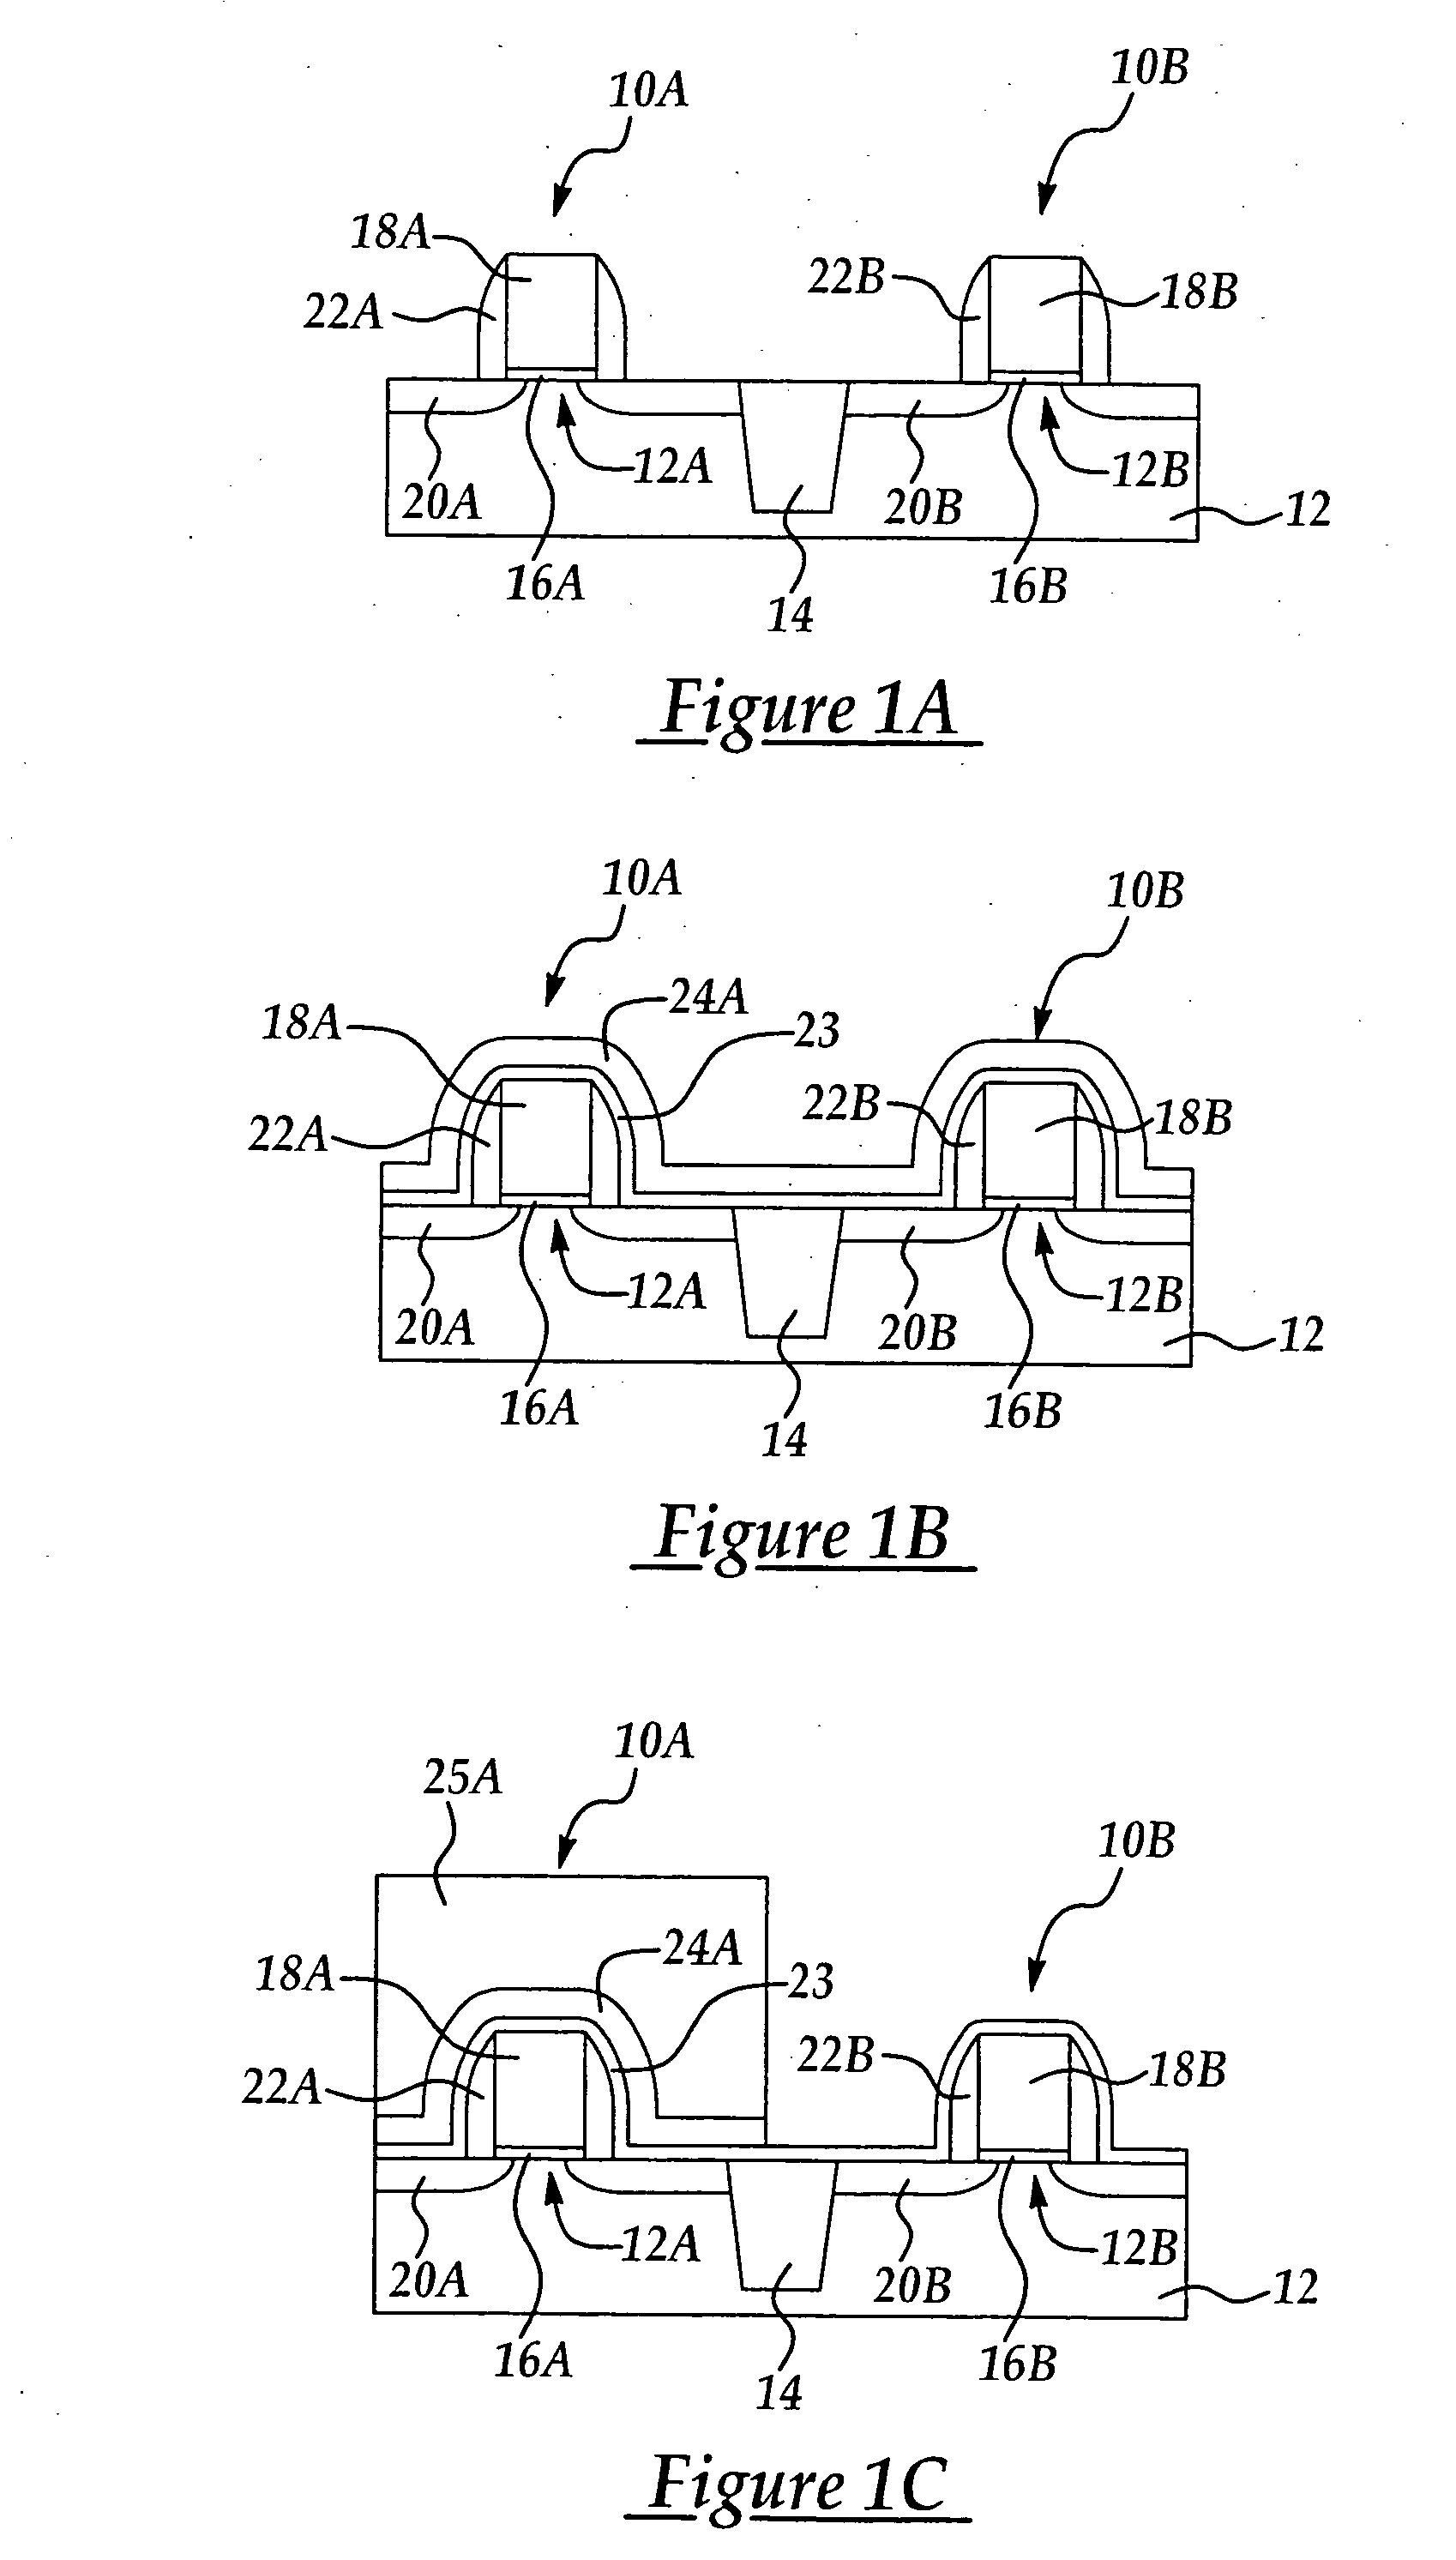 Method for selectively stressing MOSFETs to improve charge carrier mobility